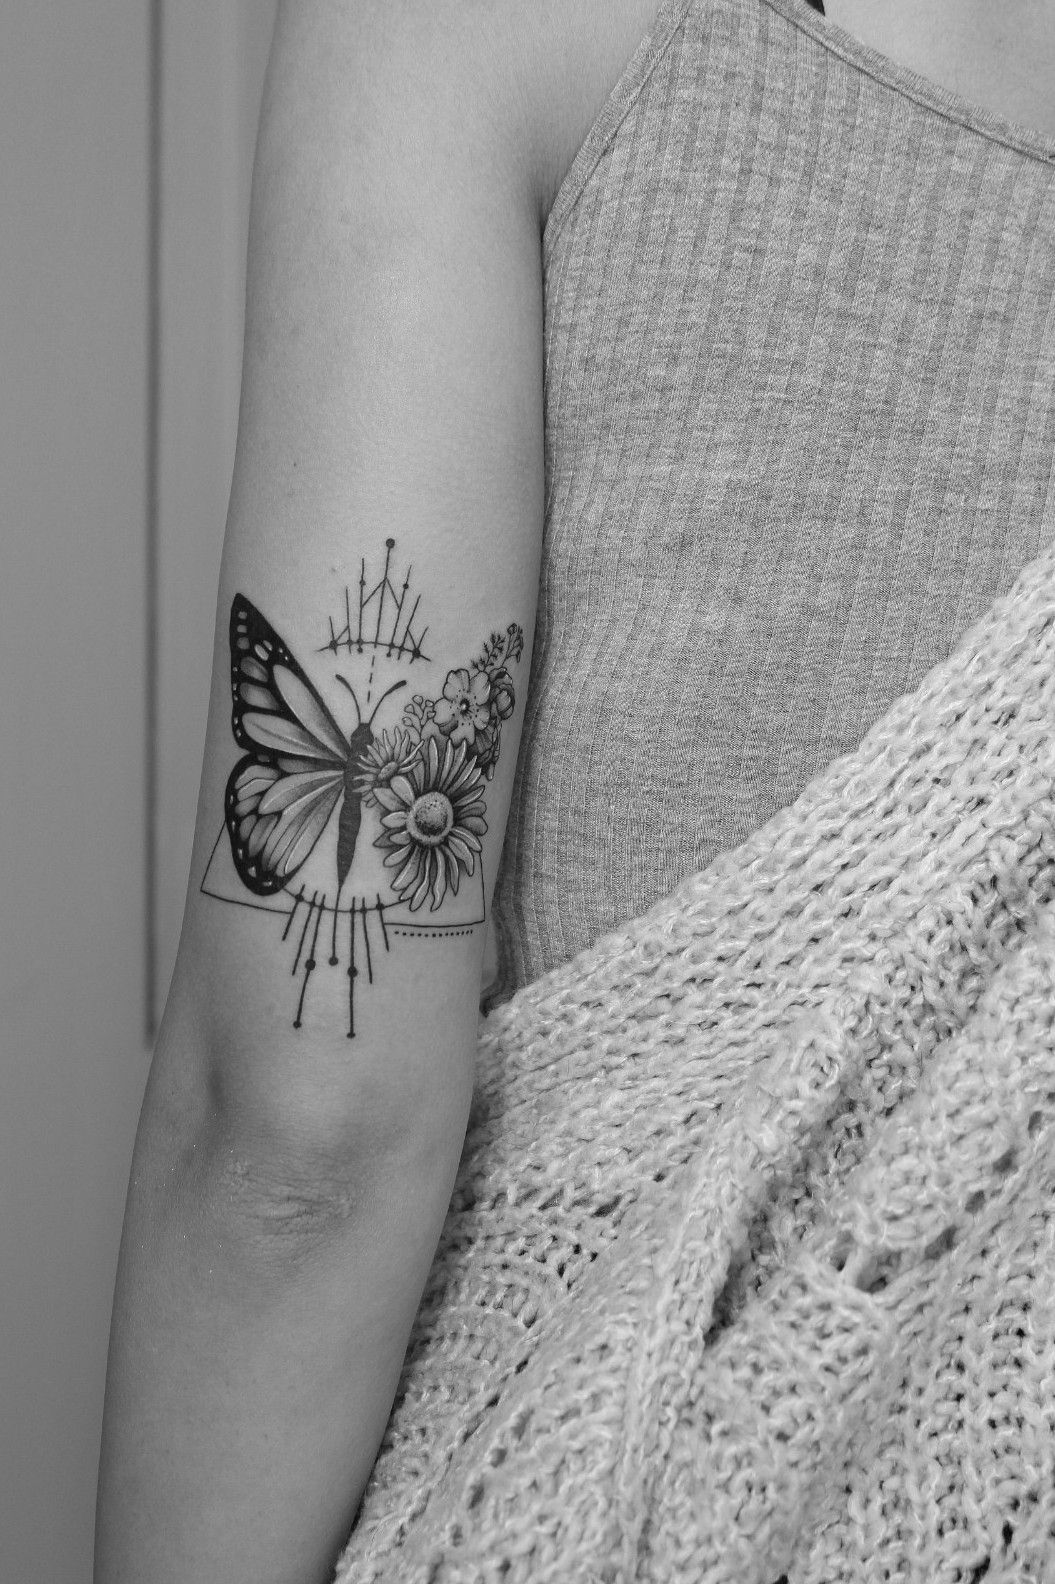 Butterfly Tattoo  Butterfly tattoos on arm Elbow tattoos Butterfly tattoo  designs